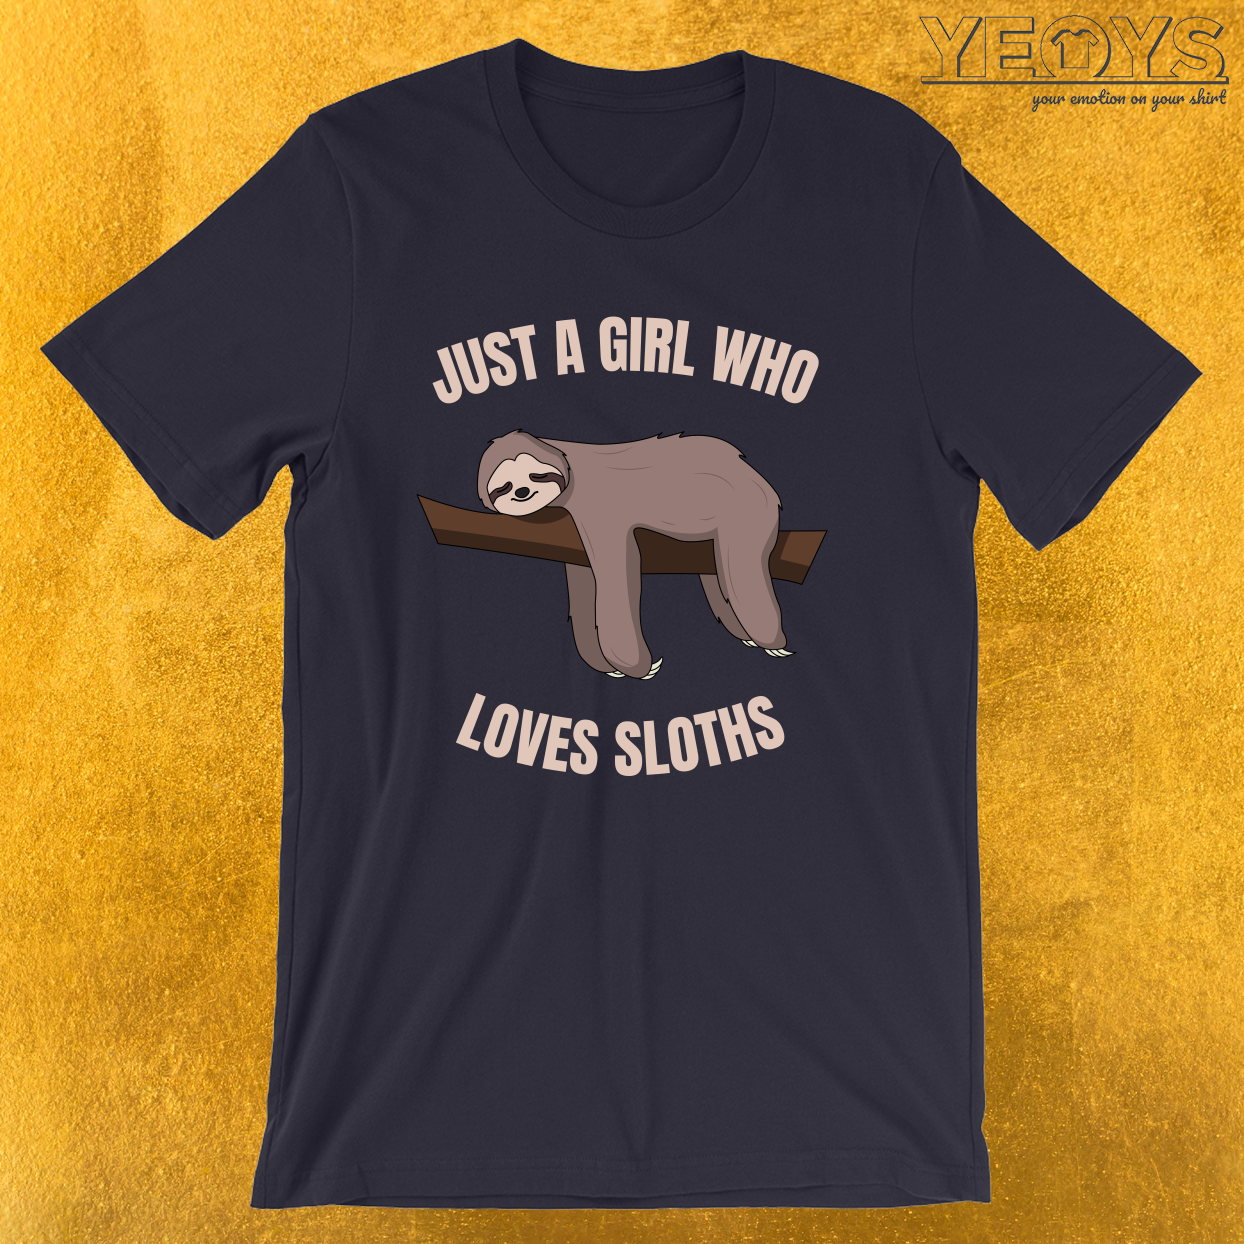 Just A Girl Who Loves Sloths – Cute Napping Sloth Tee